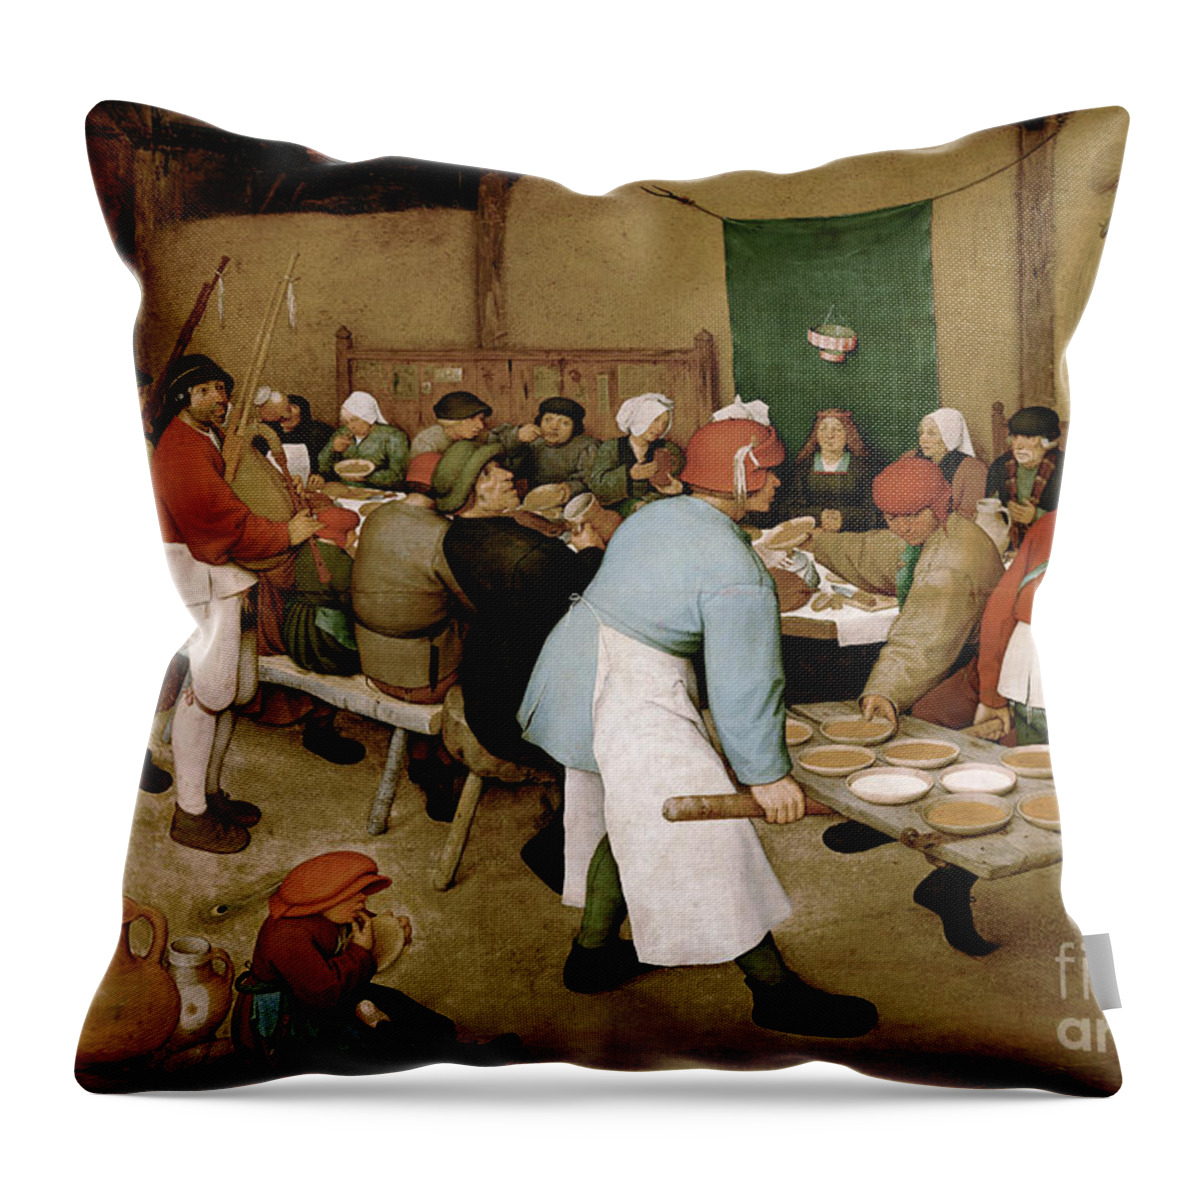 16th Century Throw Pillow featuring the painting The Peasant Wedding, c1567 by Pieter Bruegel the Elder